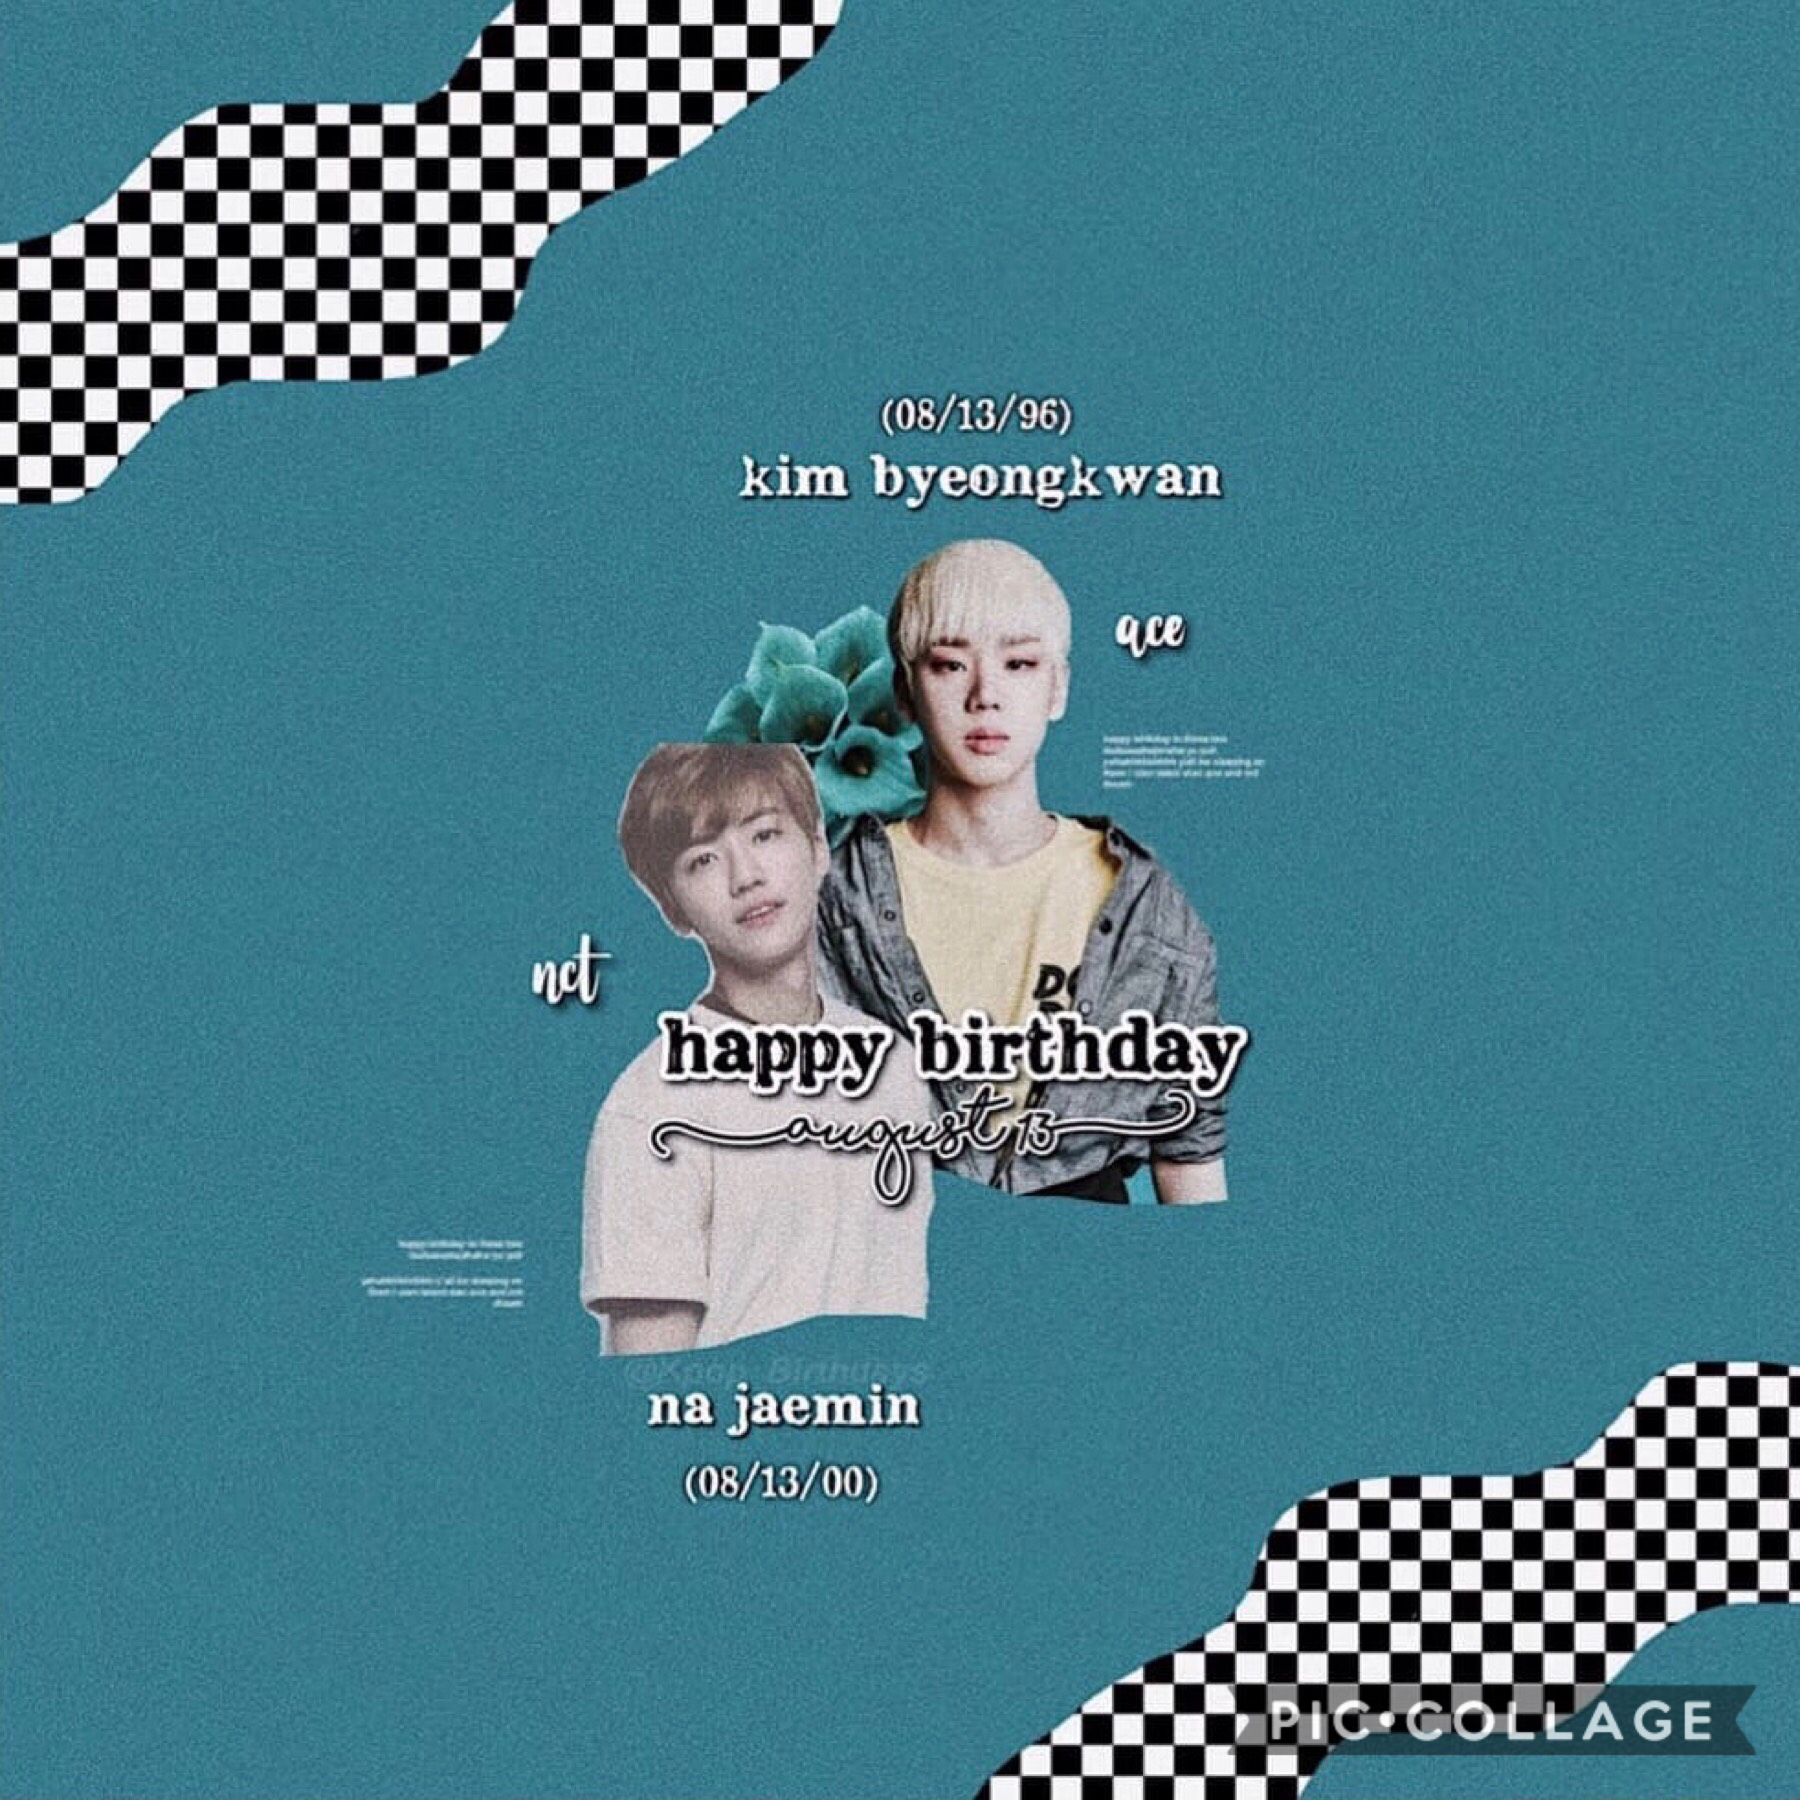 •🍃🎈•
Lol so this is Drea’s post but we had some technical difficulties 😅
Other birthdays:
•Huening Kai from TXT~ August 14
🍃🌴🍃🌴🍃🌴🍃